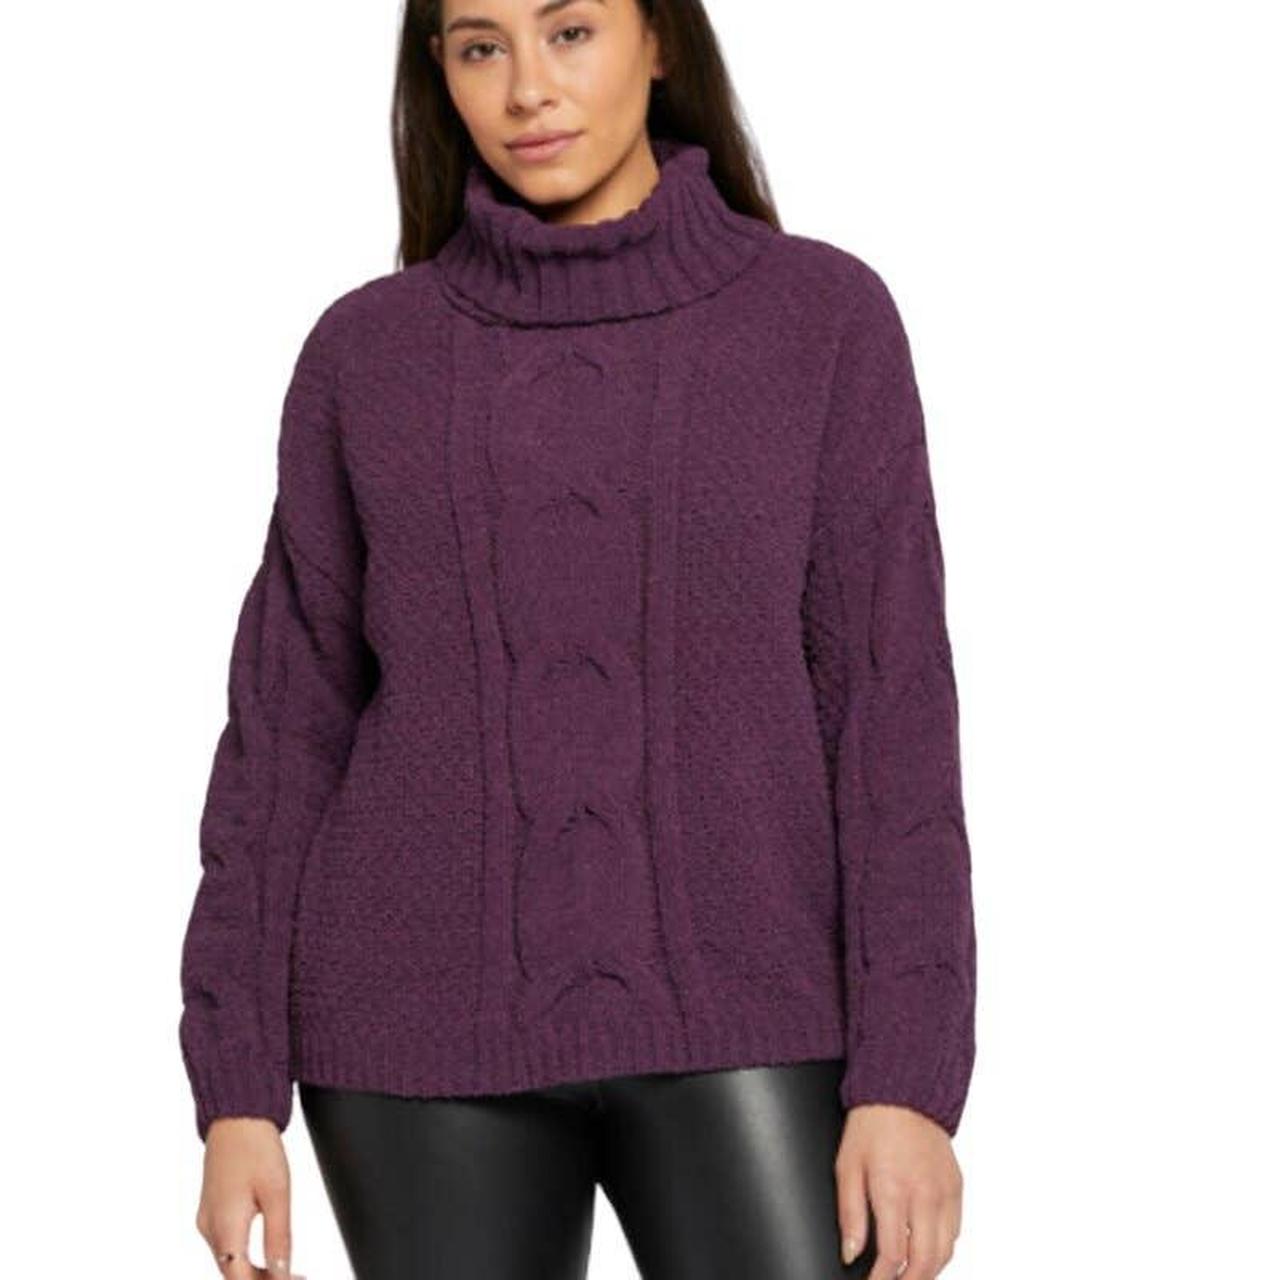 Women’s Plum Over sized Cable Knit Chenille Sweater